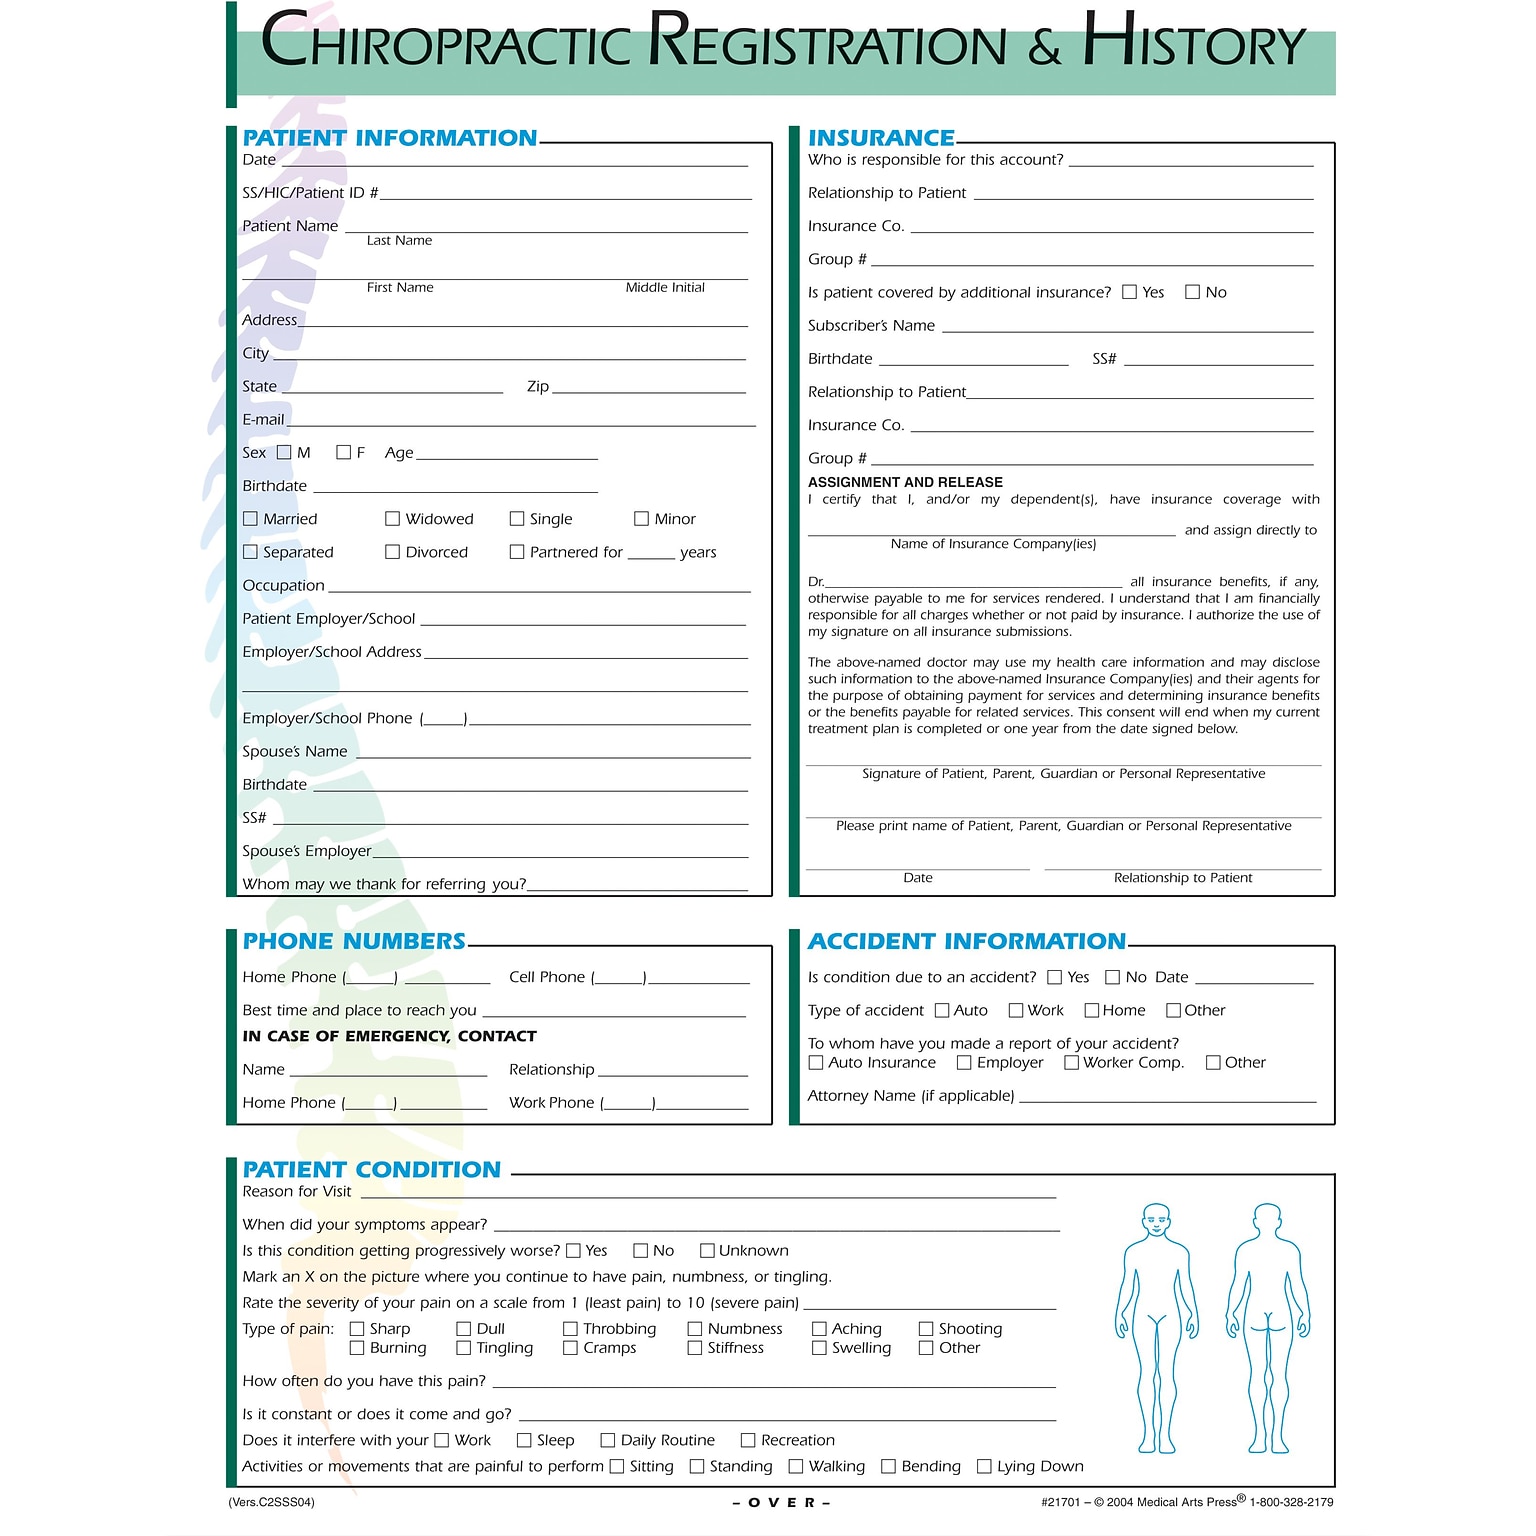 Medical Arts Press® Chiropractic Registration and History Form